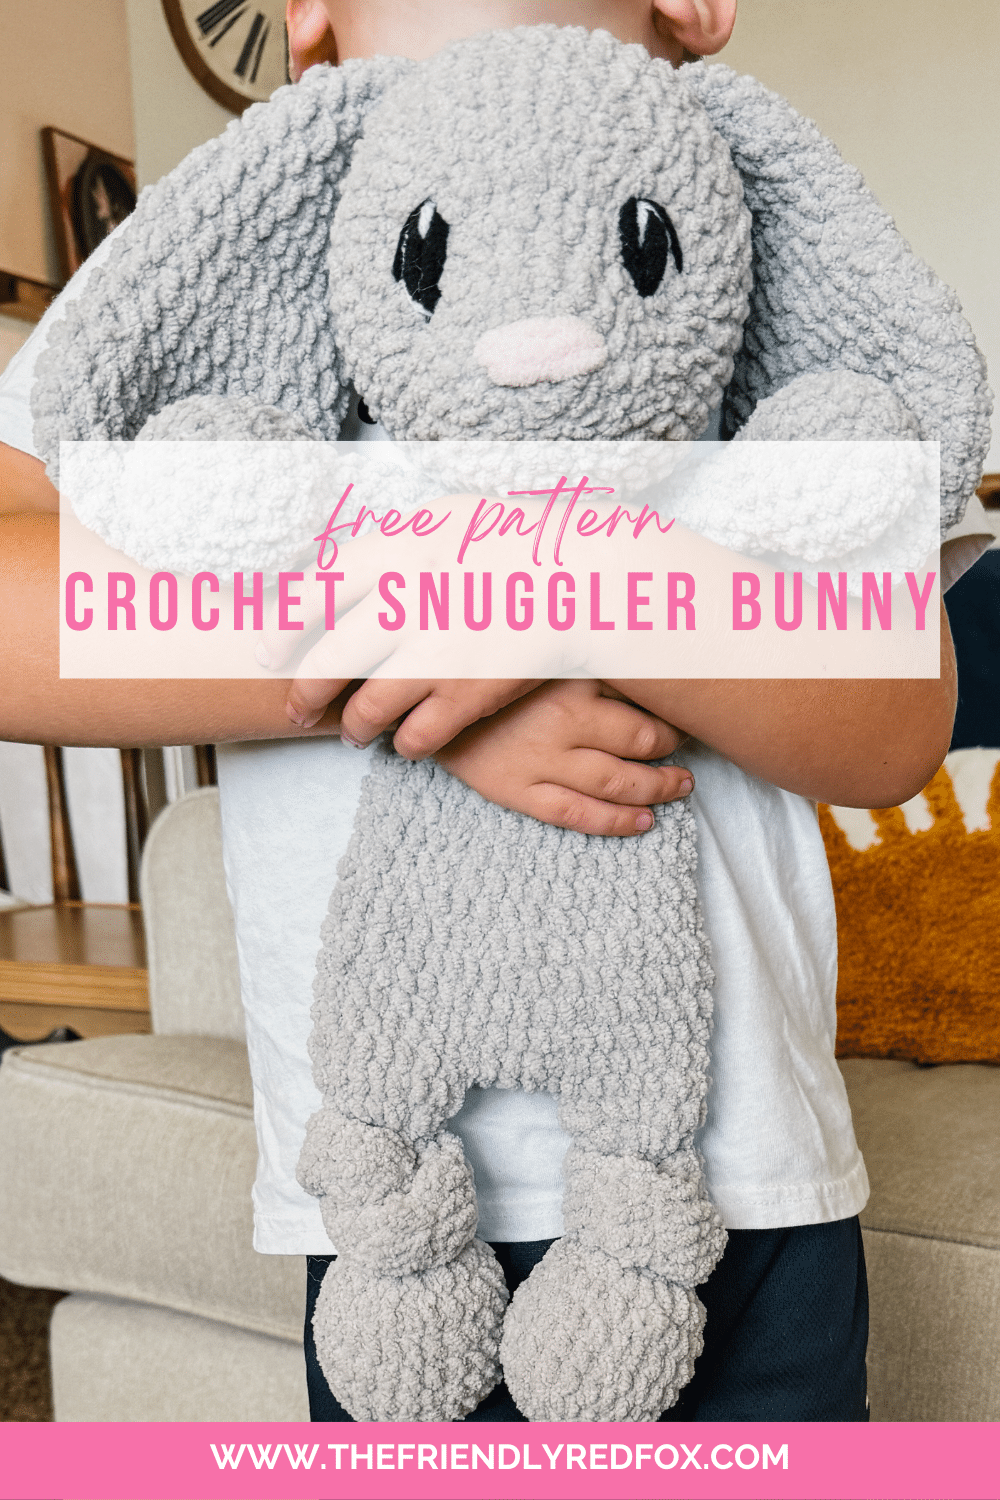 This is a free crochet snuggler pattern of the cuddly classic bunny! Half stuffed animal, half blanket but twice the fun! This crochet rabbit lovey would be a great crocheted nursery gift! Embroidered eyes and blanket yarn make it more baby friendly.